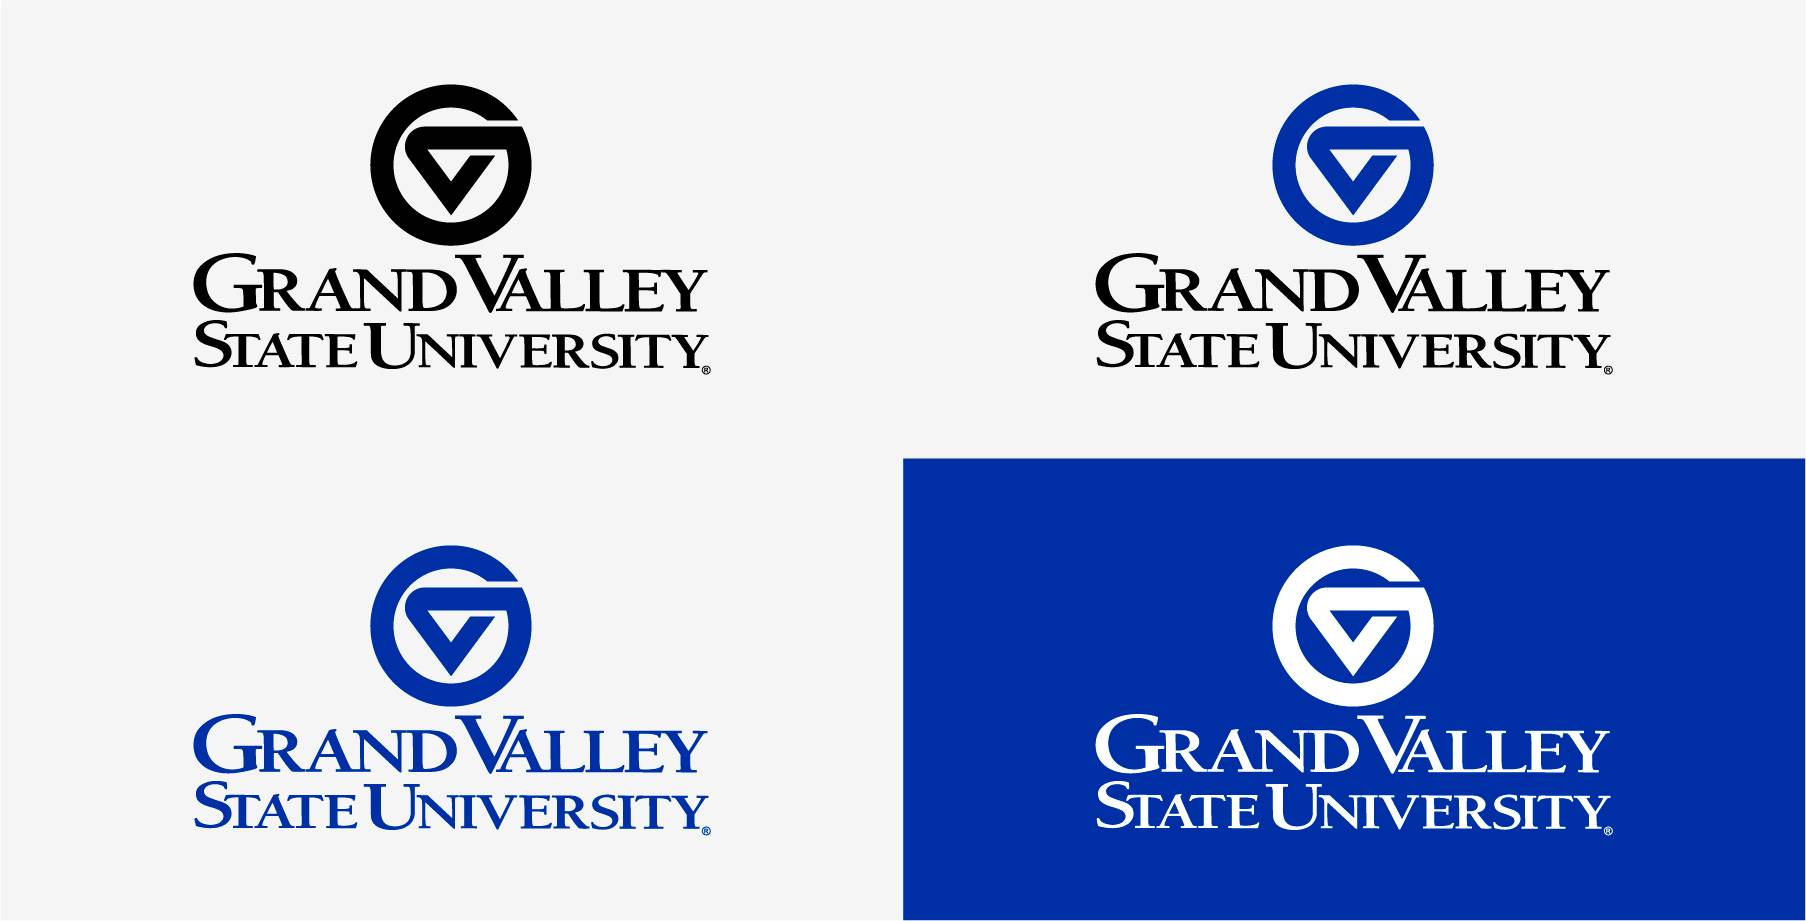 4 Grand Valley logos: one black, one blue, one black and blue, and one white.